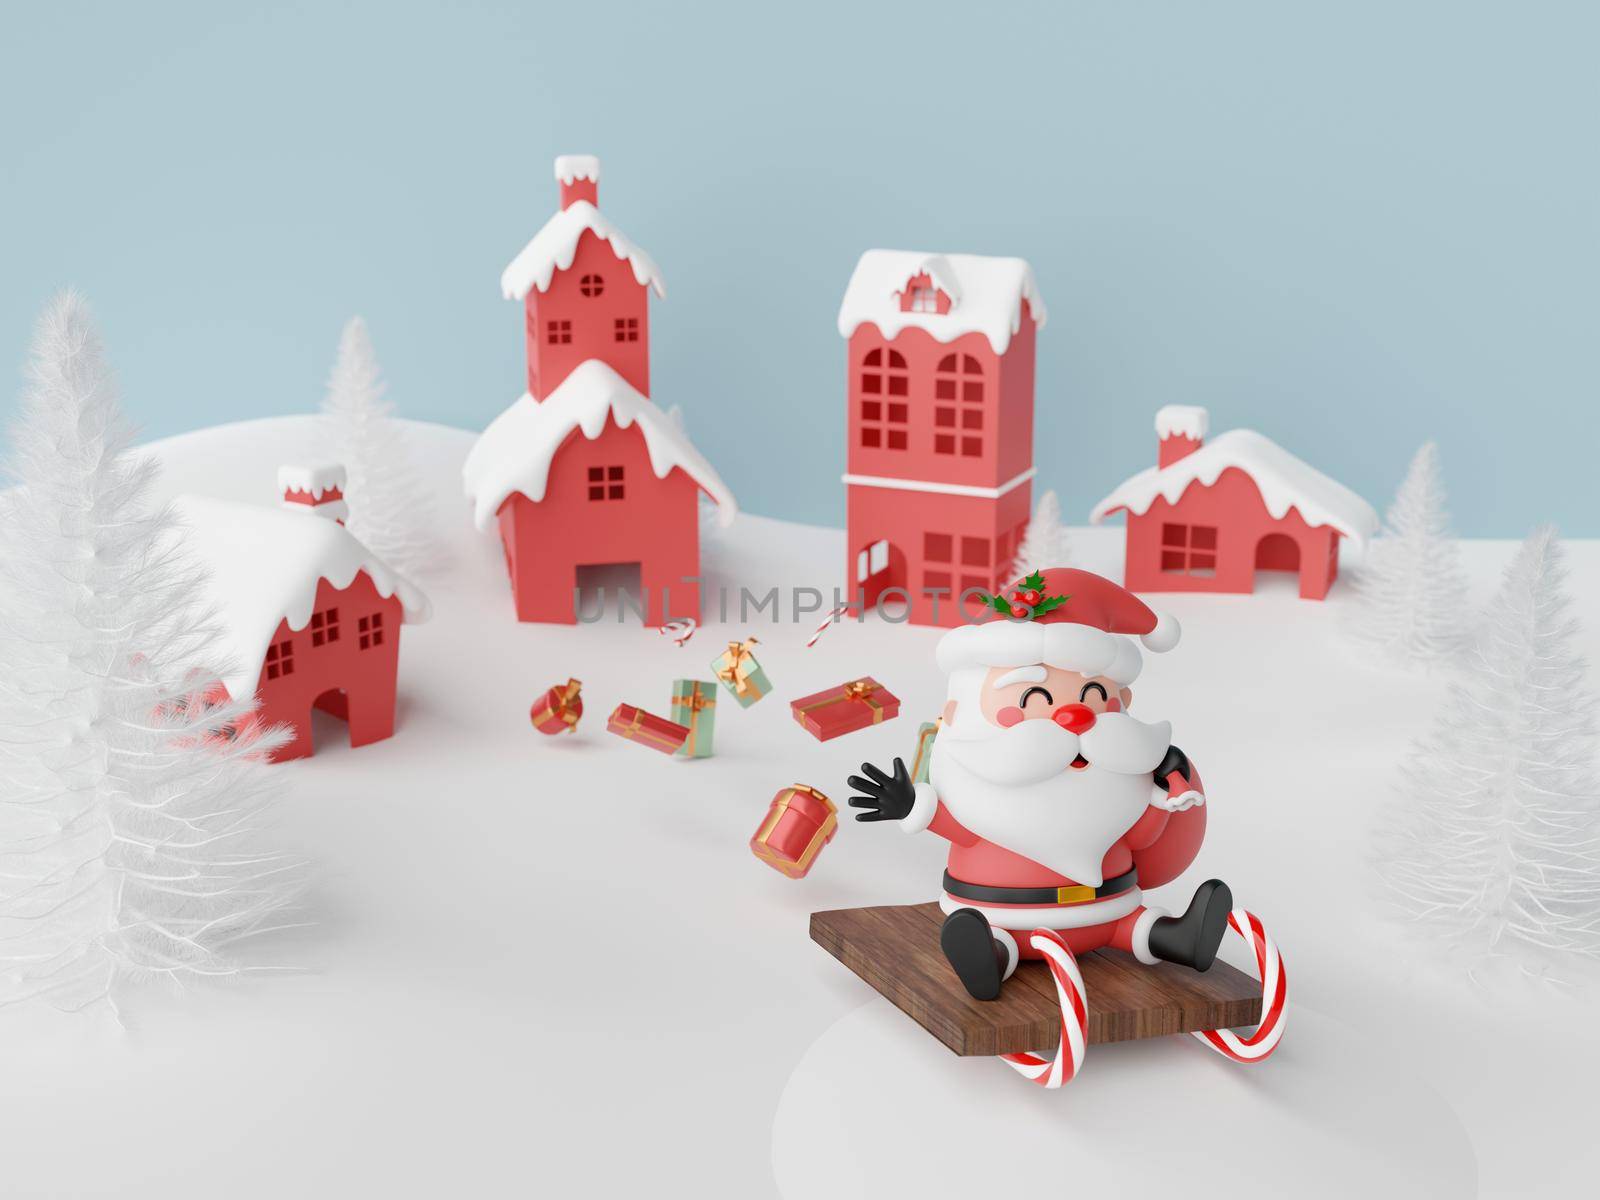 Santa Claus on sleigh to give Christmas gift in the village, 3d illustration by nutzchotwarut